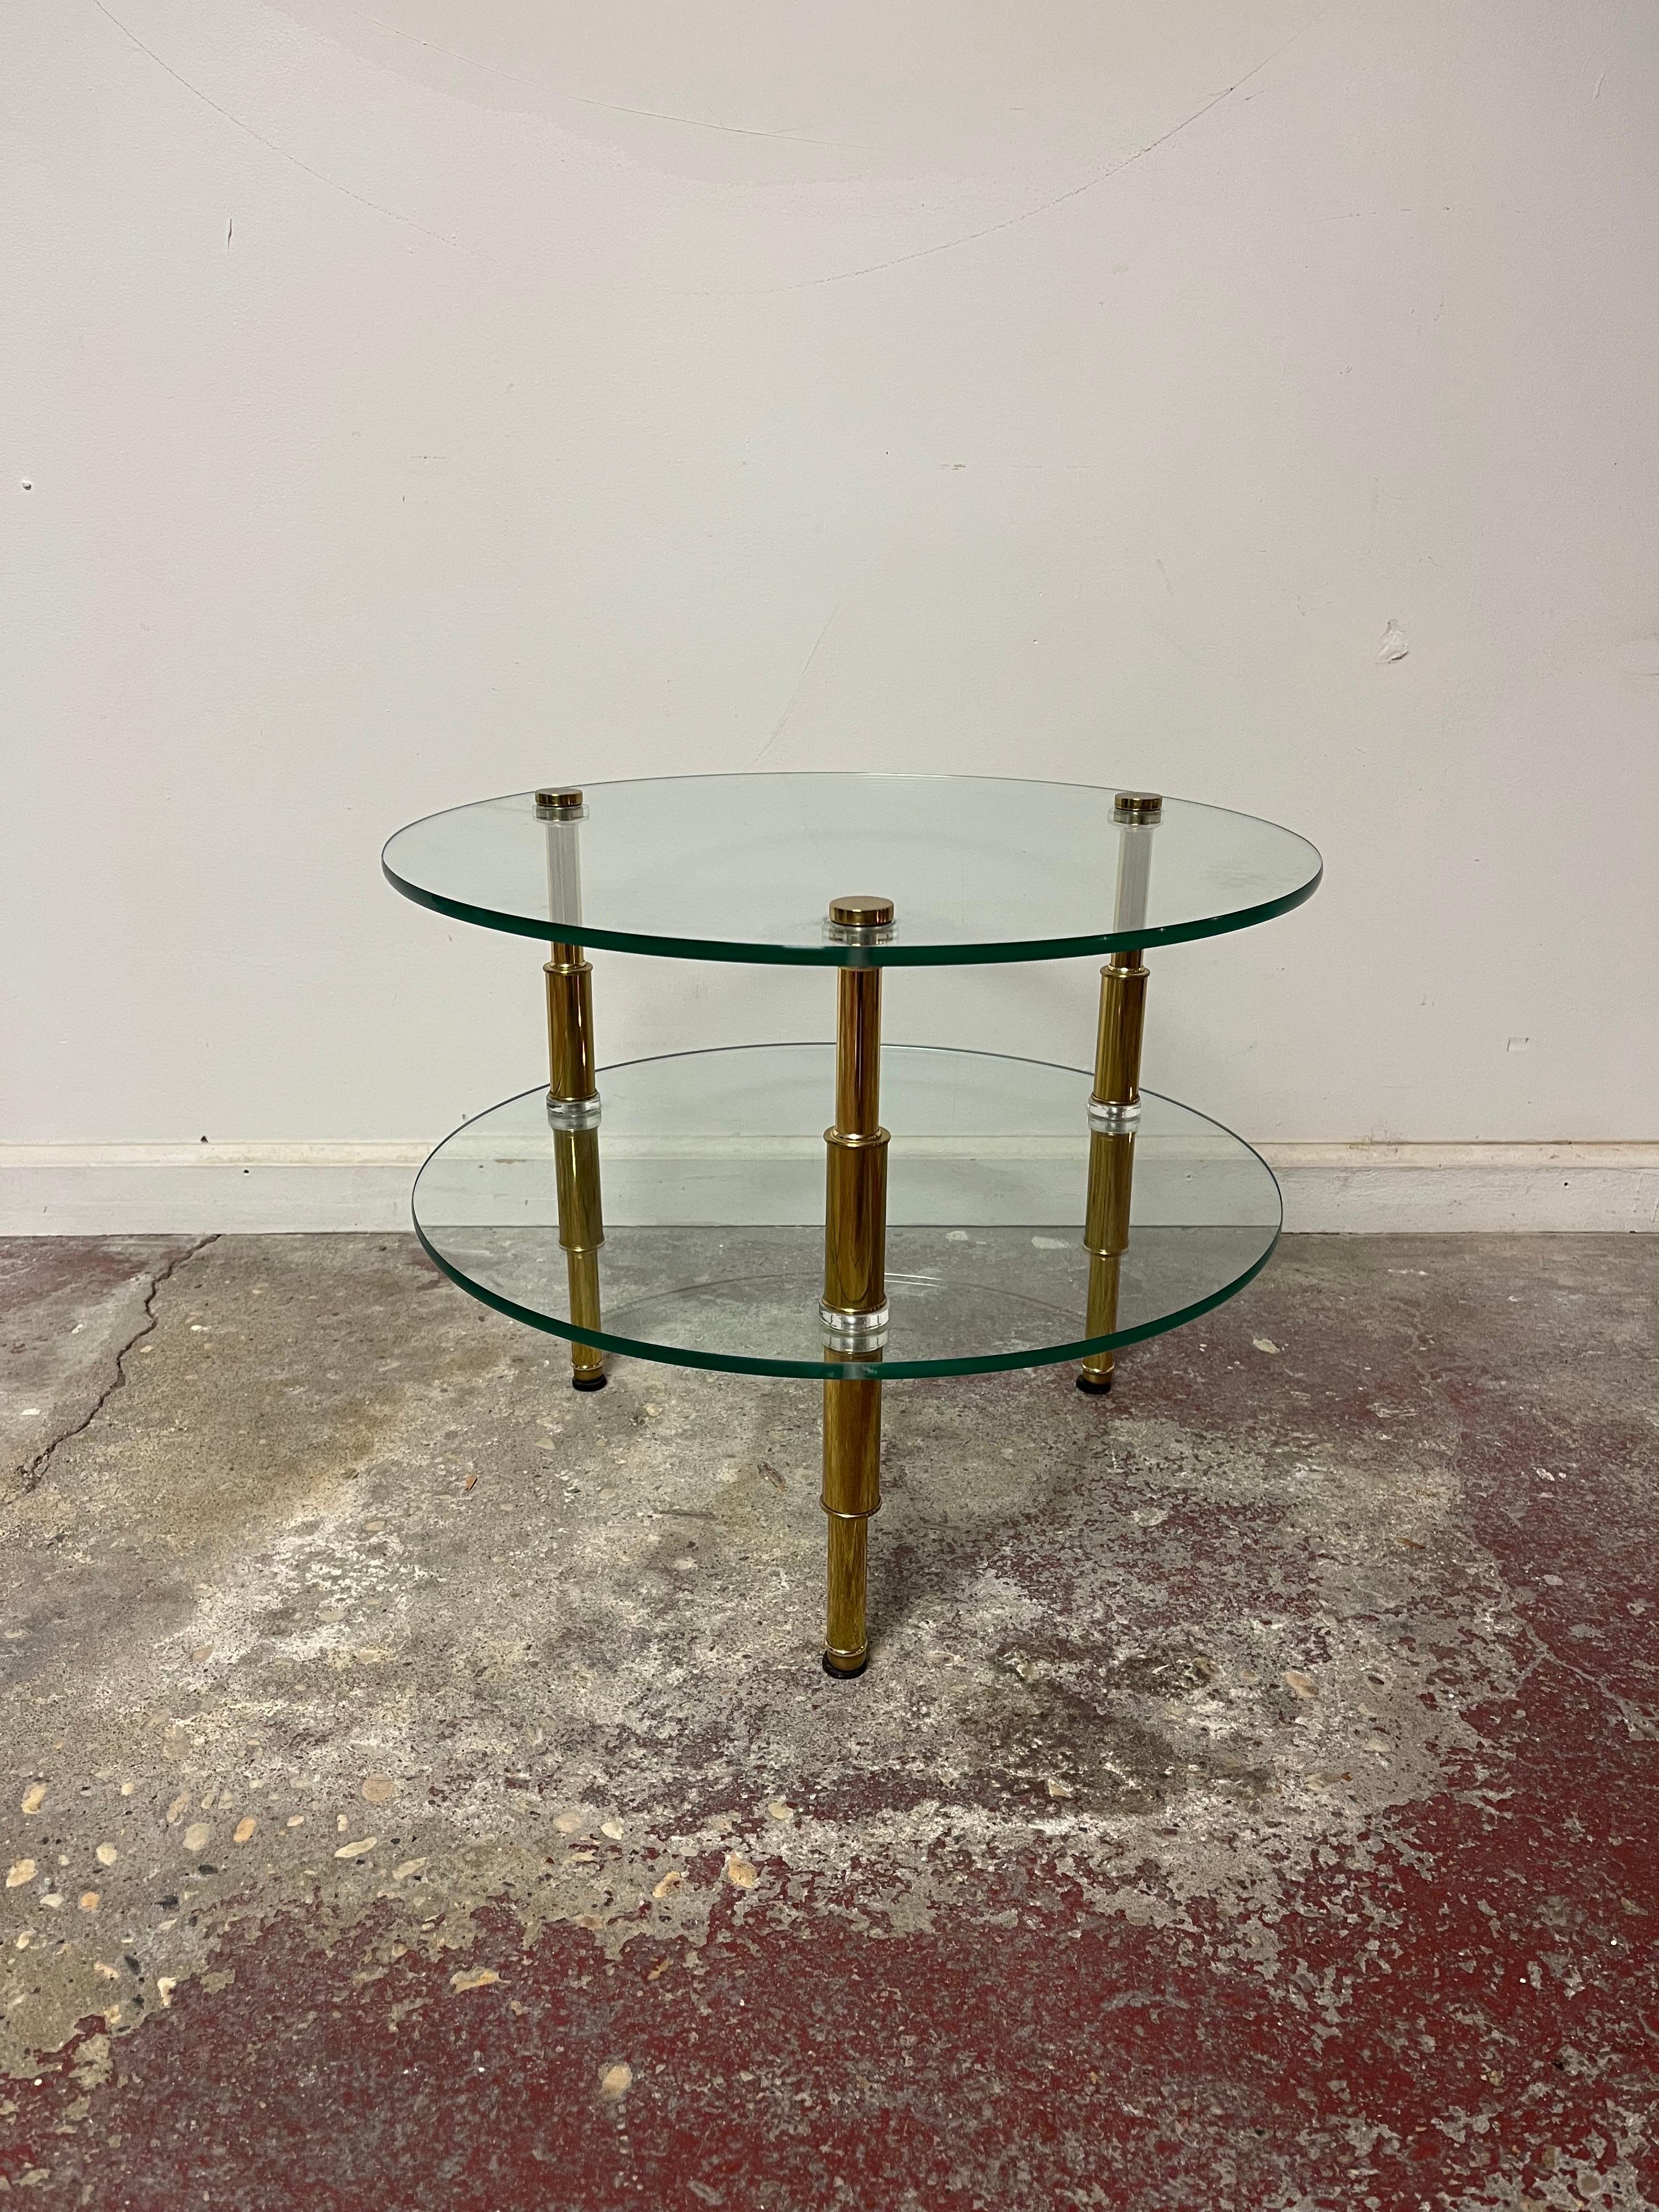 Beautiful occasional table. Brass legs with a tapered design and a modern bamboo look. 2 glass shelves with brass caps. Lucite spacers for added visual impact. High quality, heavy, possibly Italian. 
Curbside to NYC/Philly $350